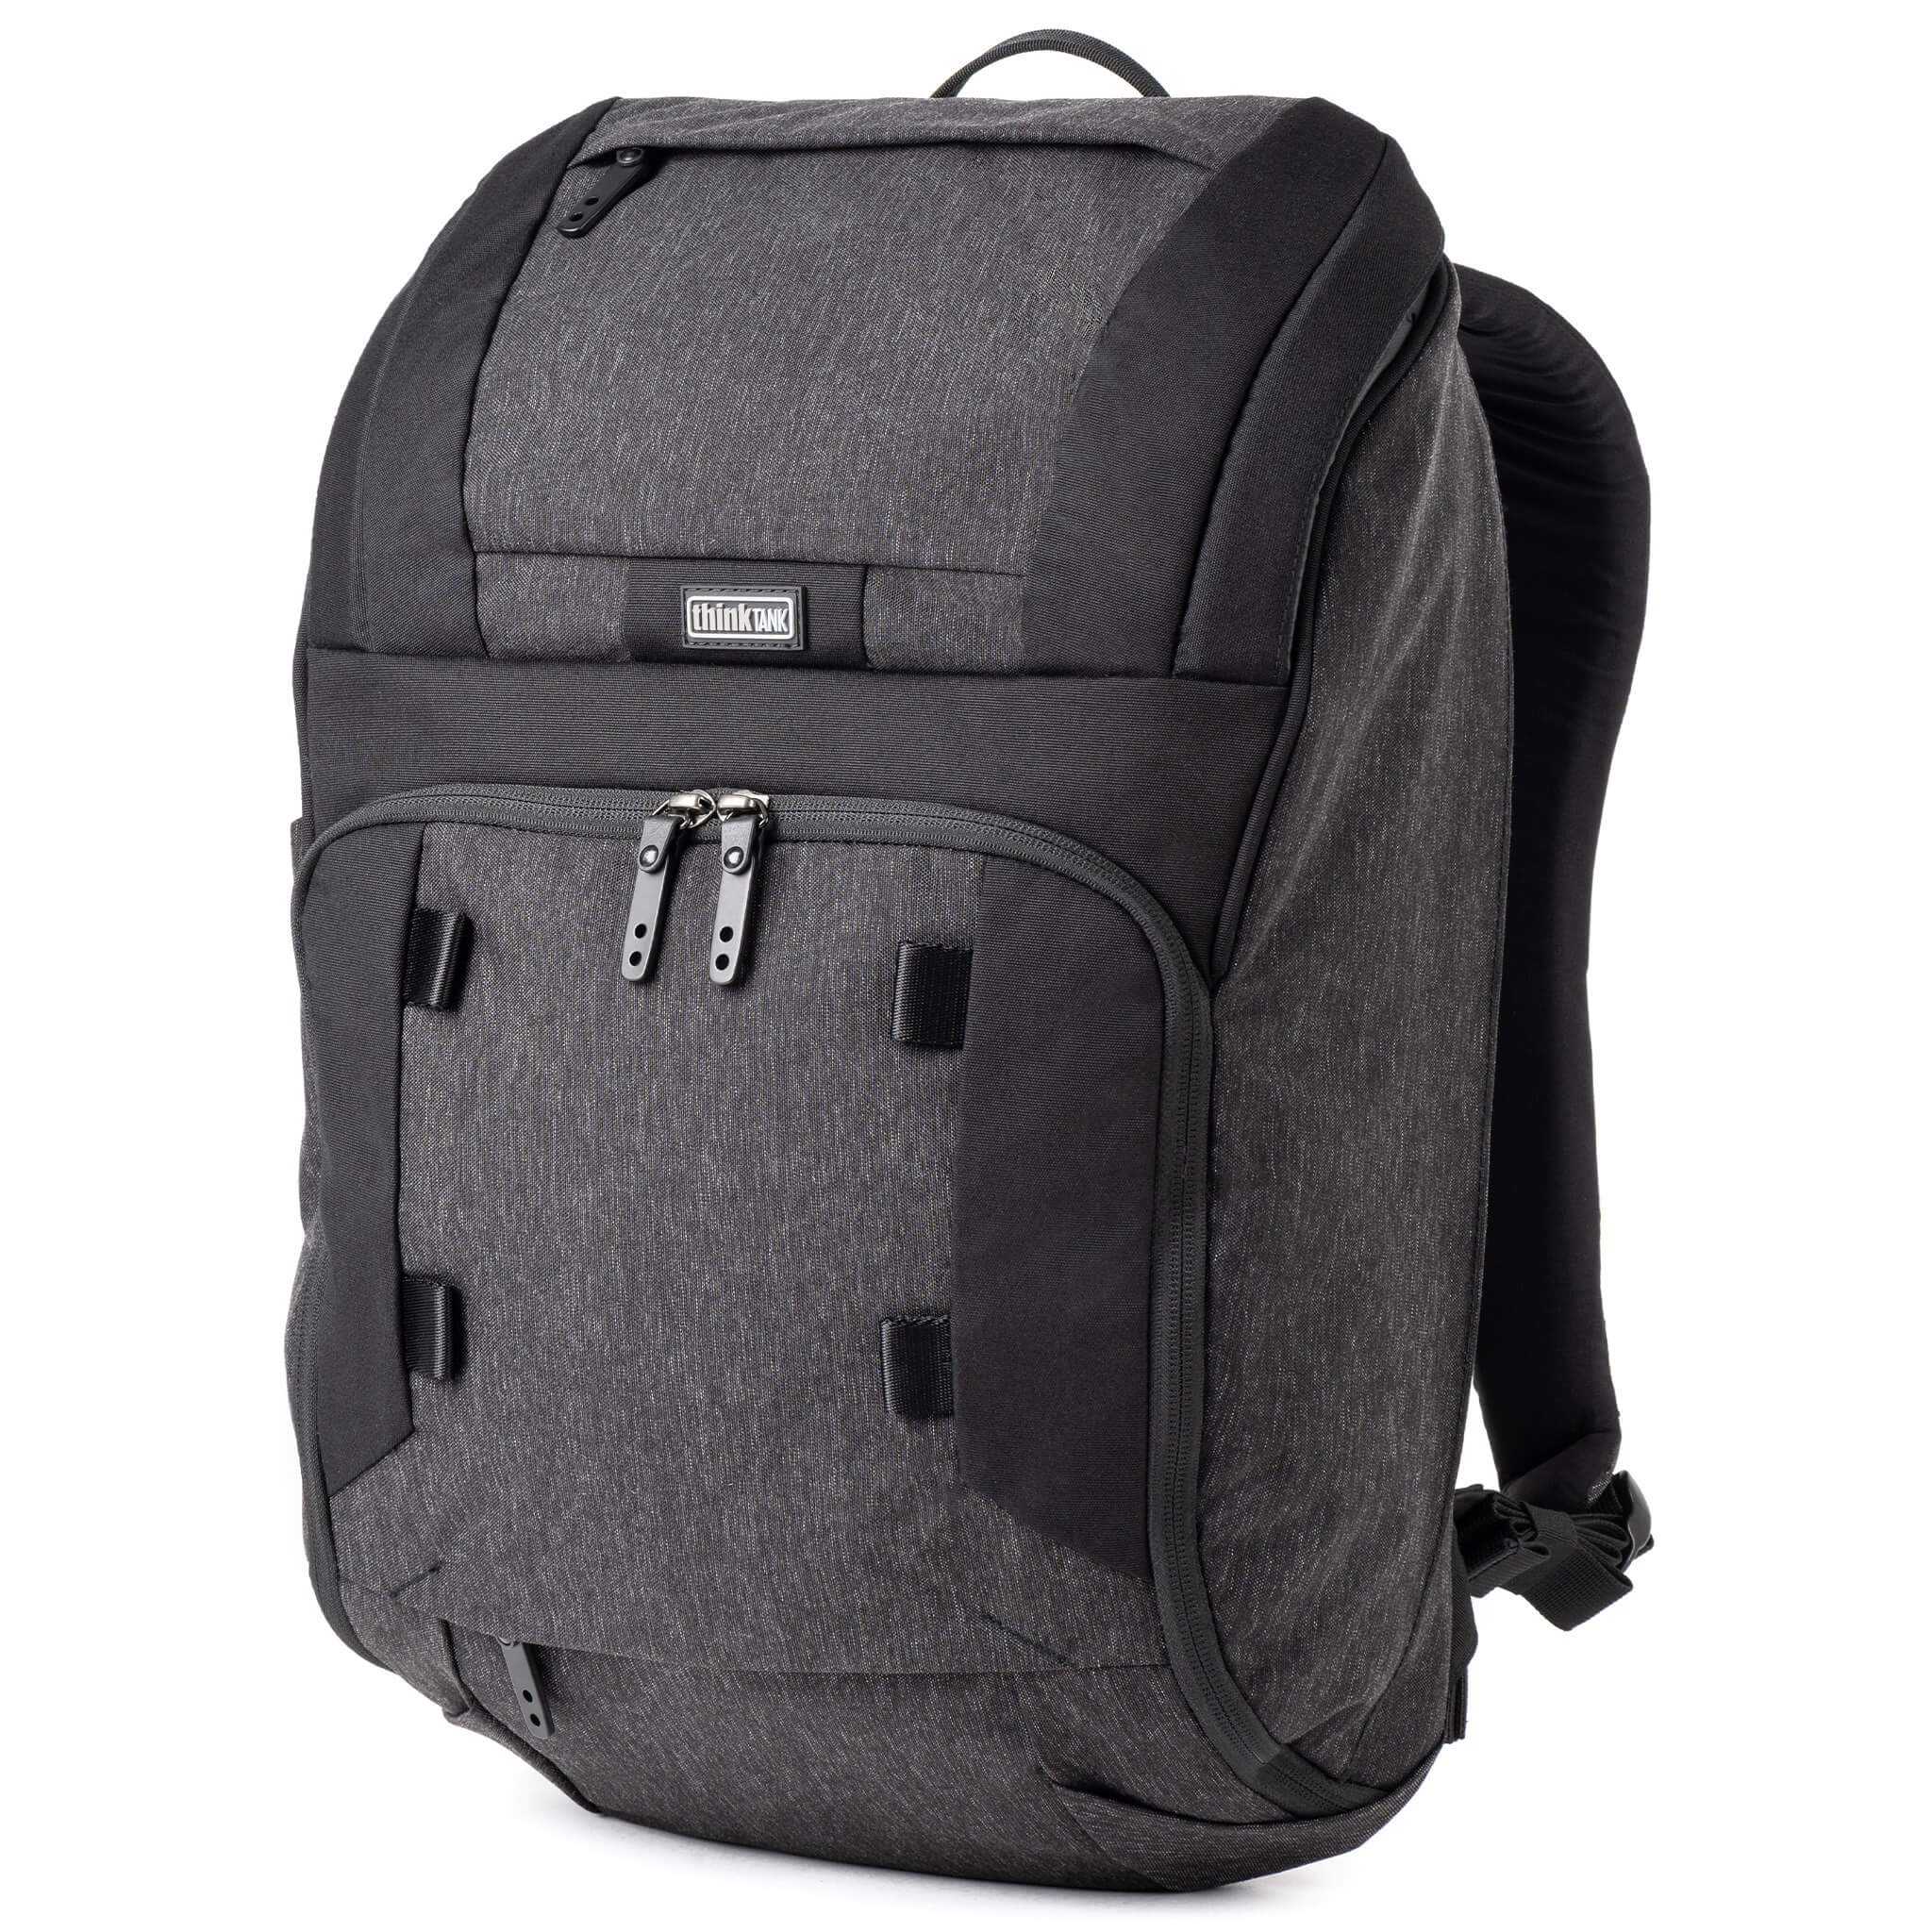 Think Tank SpeedTop™ 20 Backpack - 20L Gray